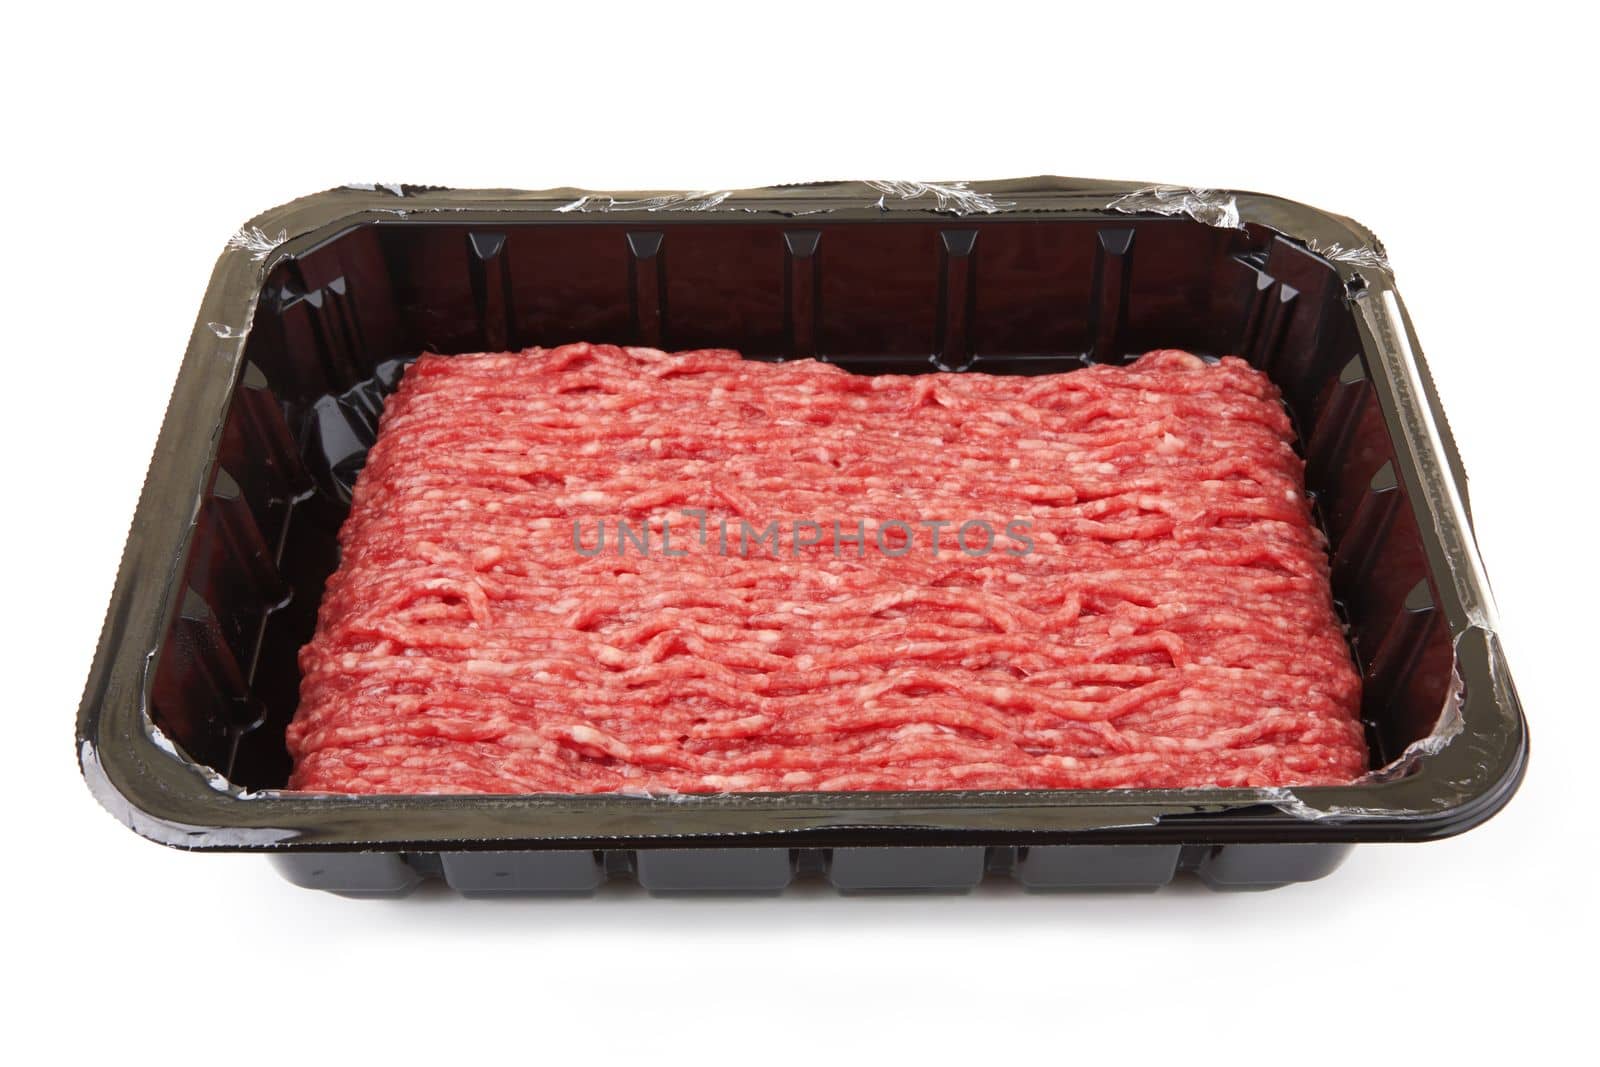 Minced meat in a plastic box by pioneer111